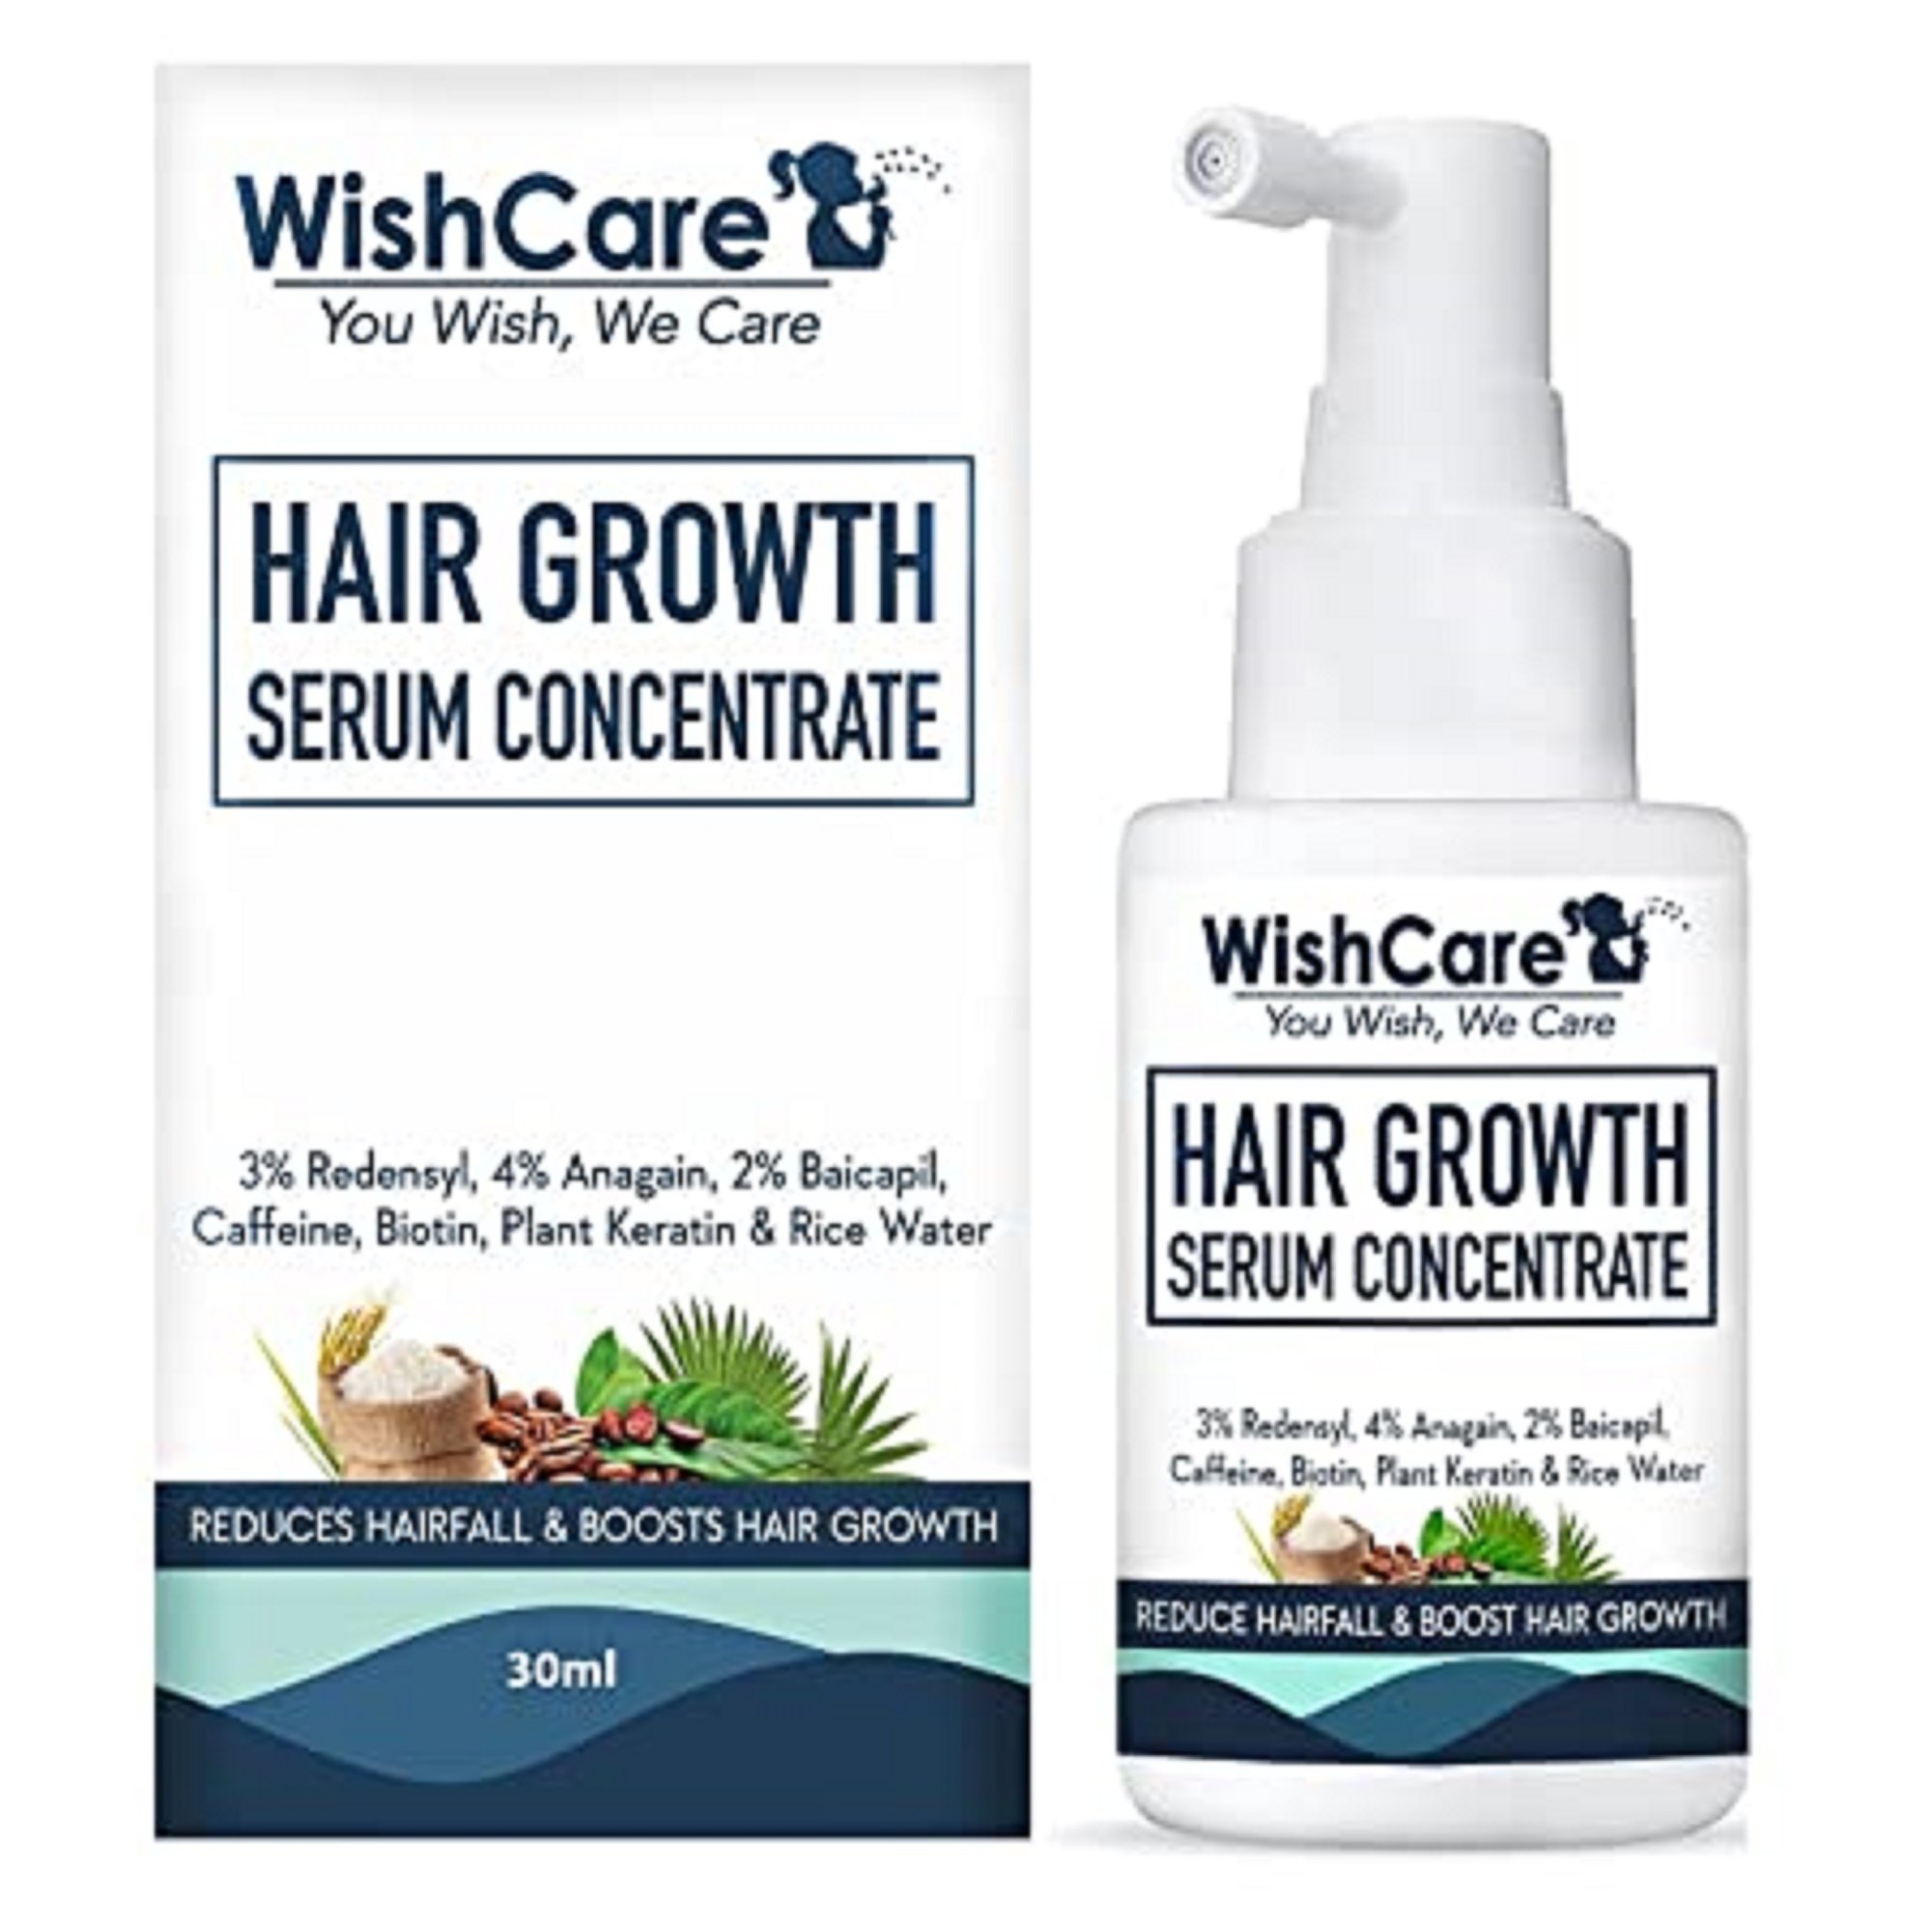 WishCare Hair growth serum concentrate